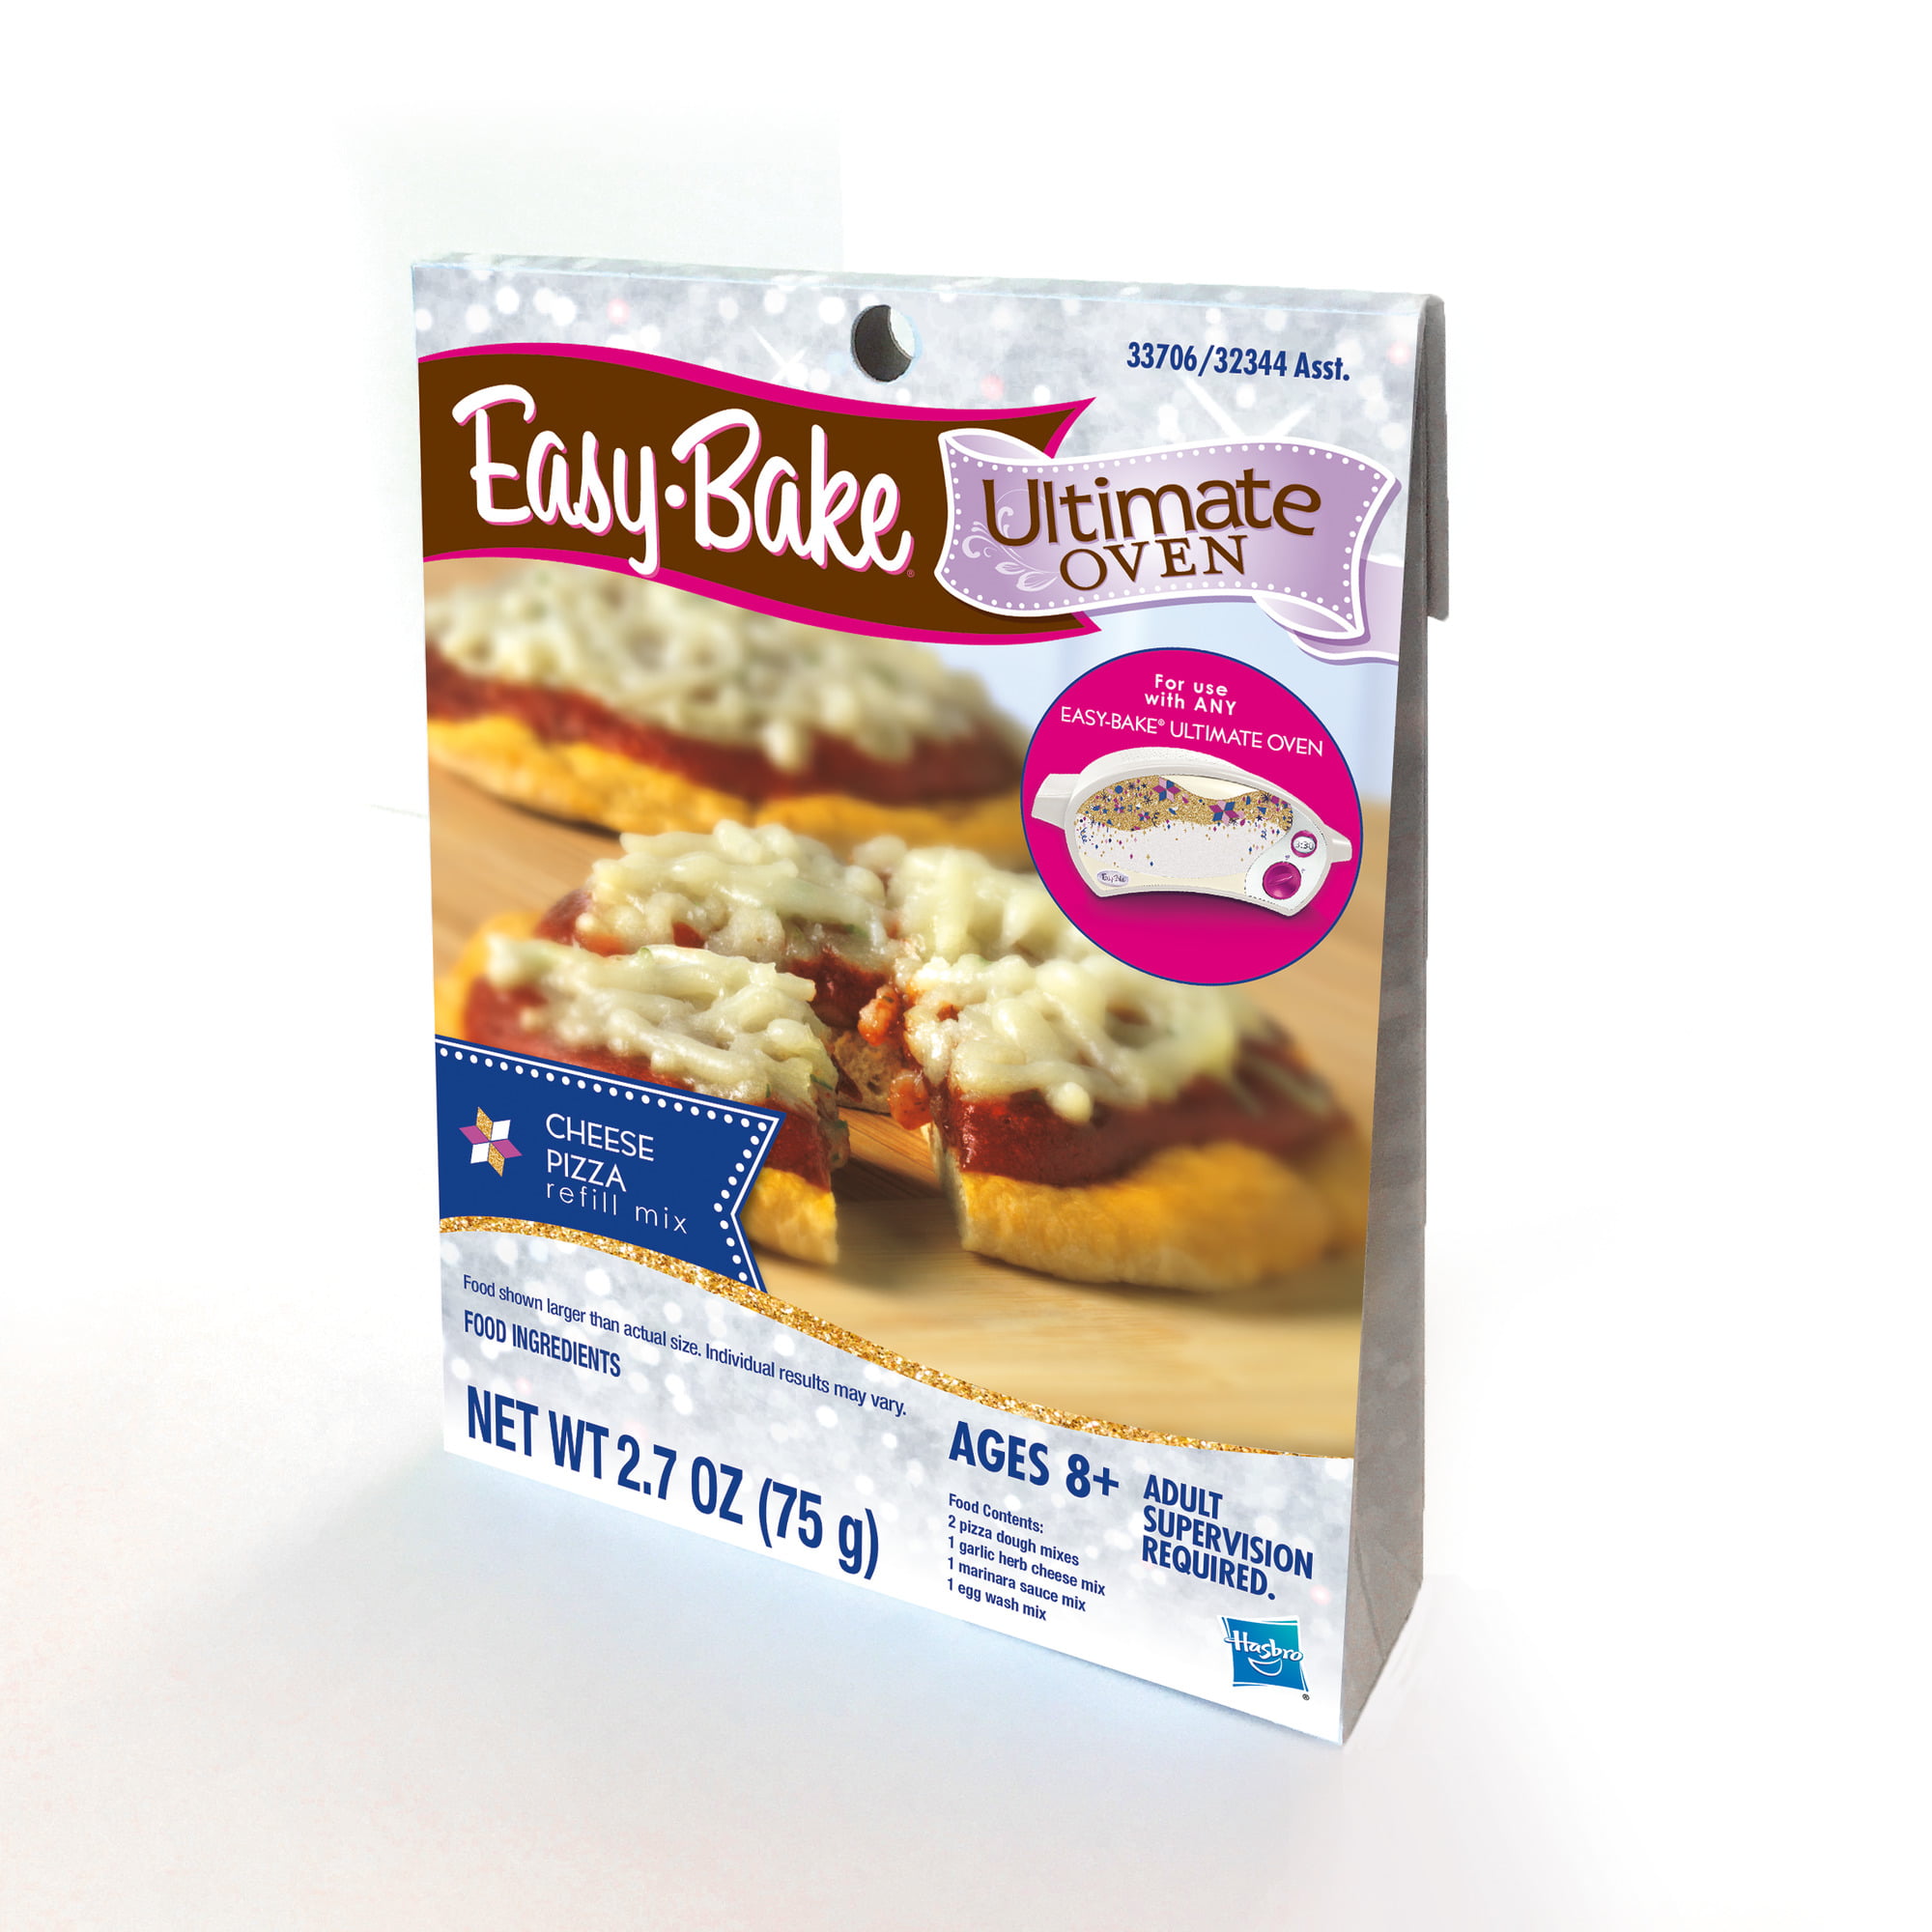 Refills EZ to Make Fun 2 Bake Mojo's Ultimate Easy to Bake Oven Party Cheese Pizza Refill Mixes Bundle 3 Pack 